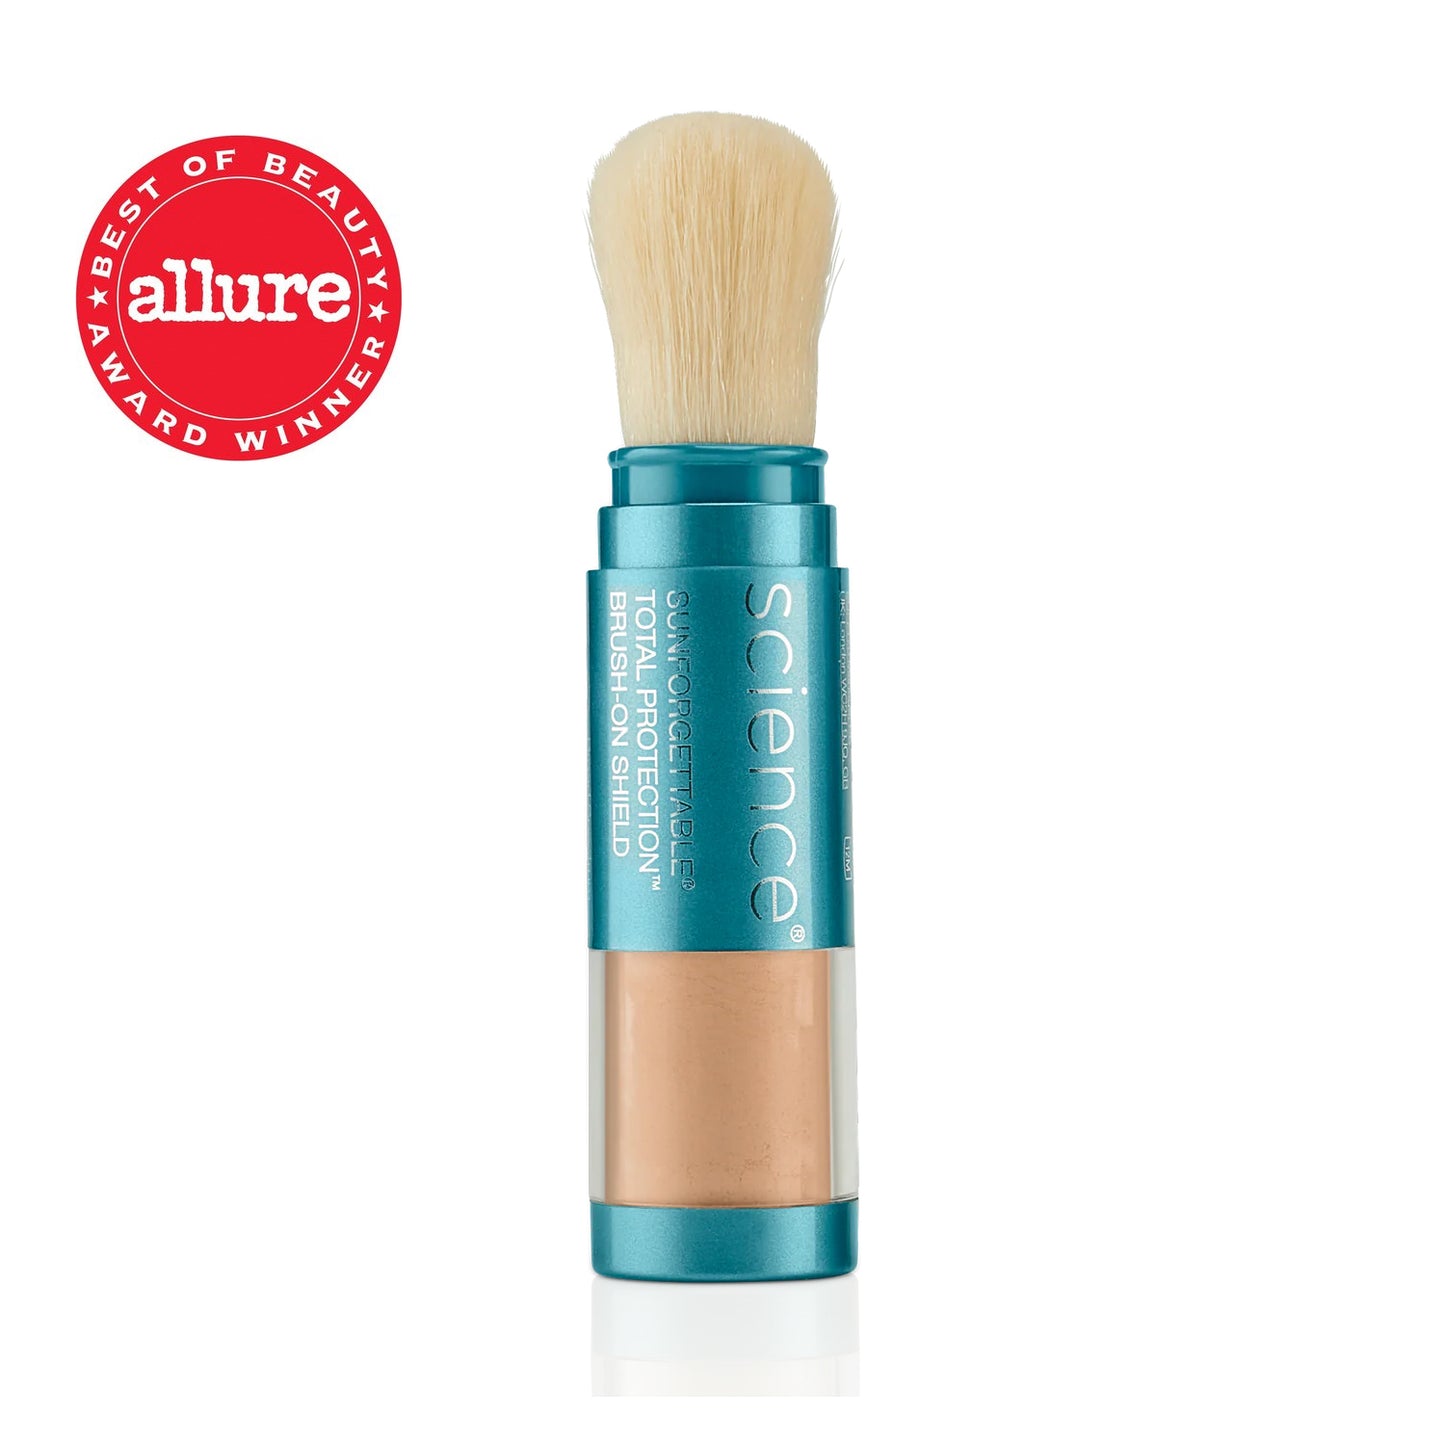 Sunforgettable® Total Protection® Brush-On Shield SPF 50